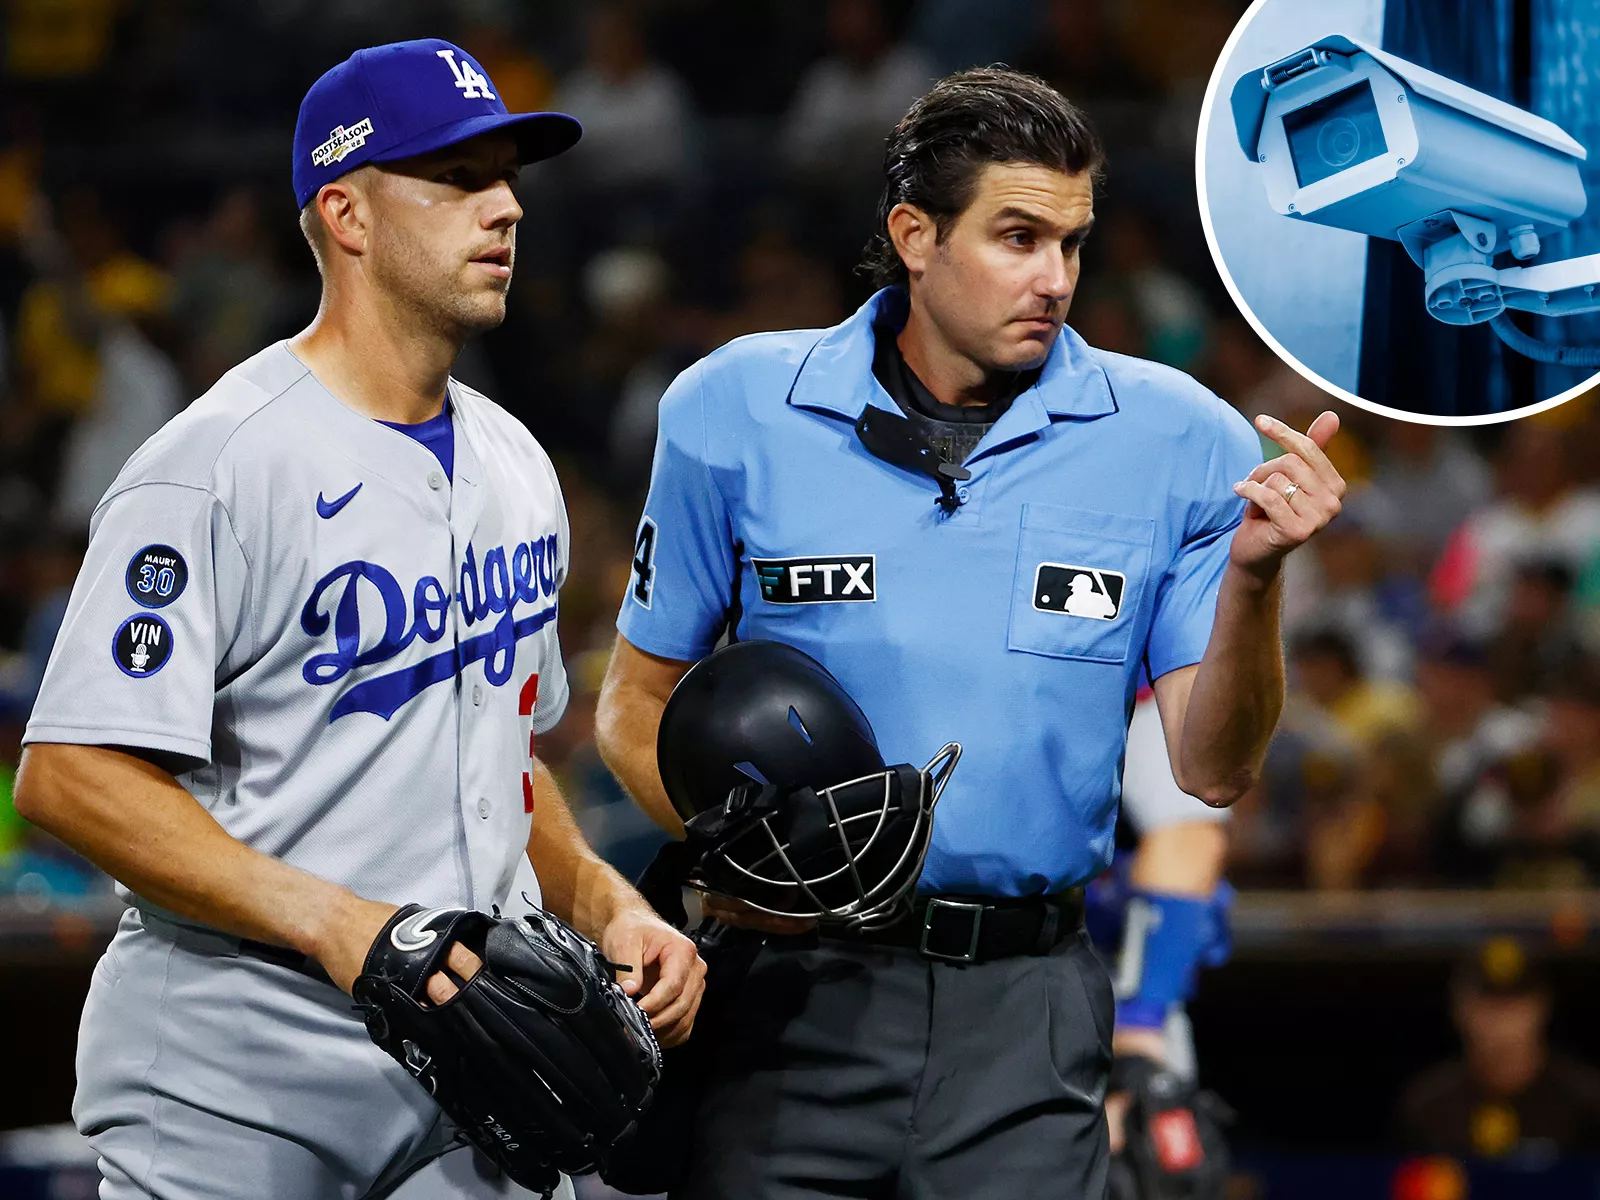 MLB Fans Threaten to Boycott Over 'Robot Umpires'—'Will Ruin the Game